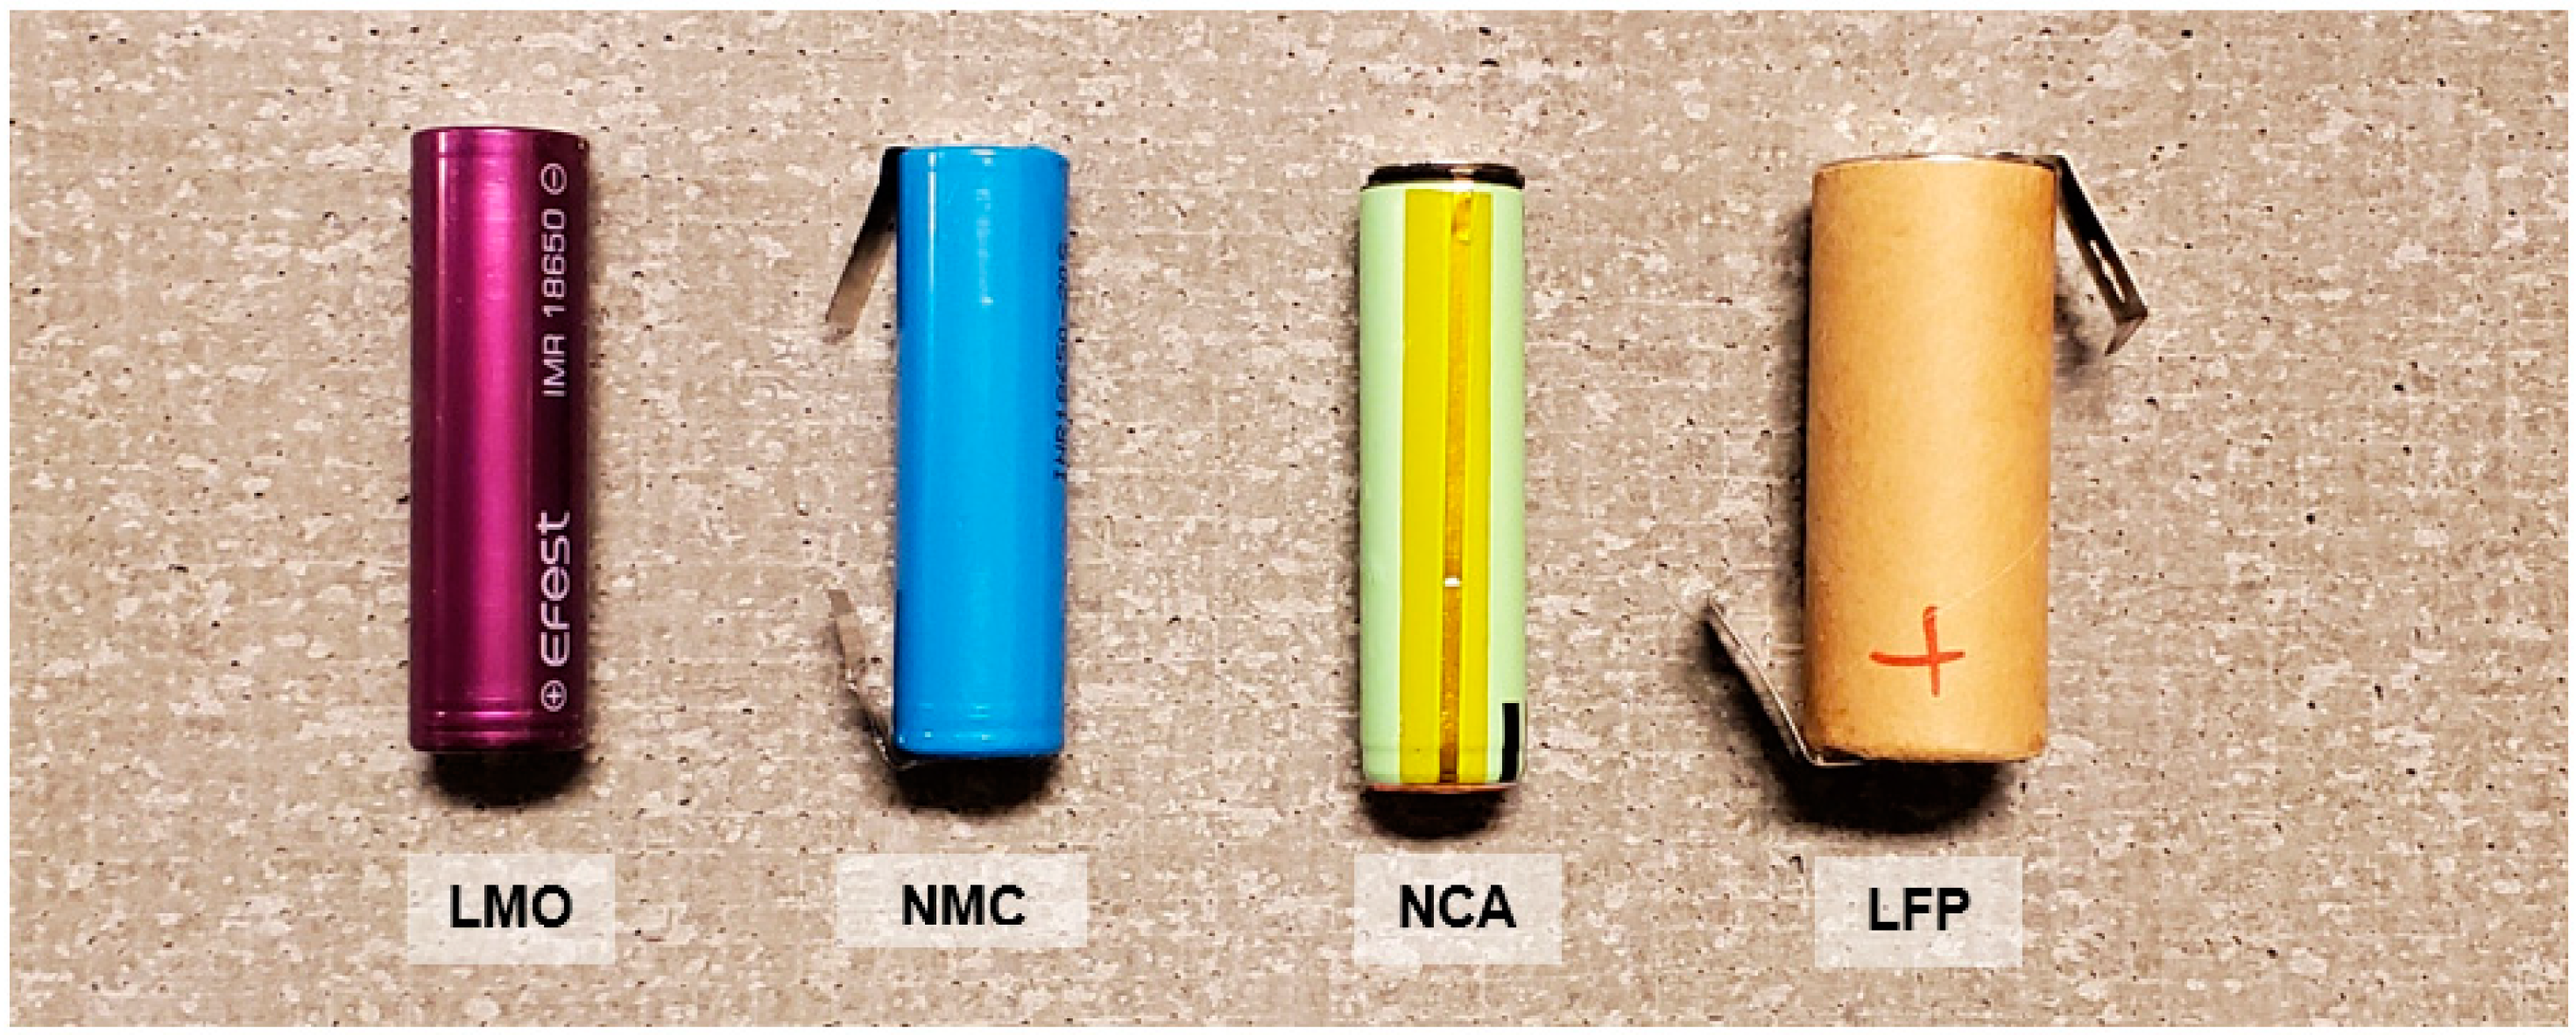 Batteries | Free Full-Text | Comparative Study of Equivalent Circuit Models  Performance in Four Common Lithium-Ion Batteries: LFP, NMC, LMO, NCA | HTML